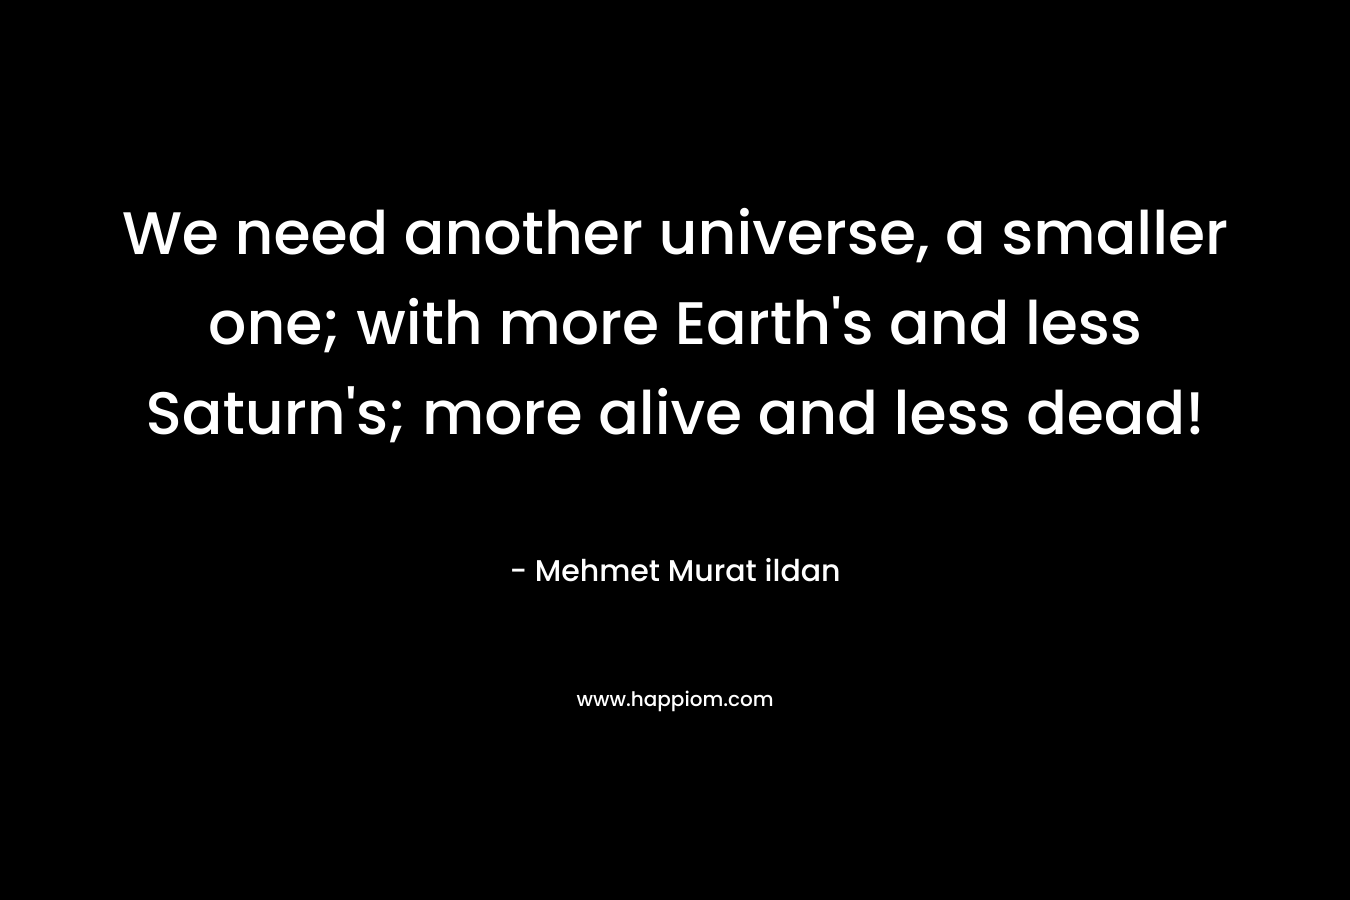 We need another universe, a smaller one; with more Earth’s and less Saturn’s; more alive and less dead! – Mehmet Murat ildan